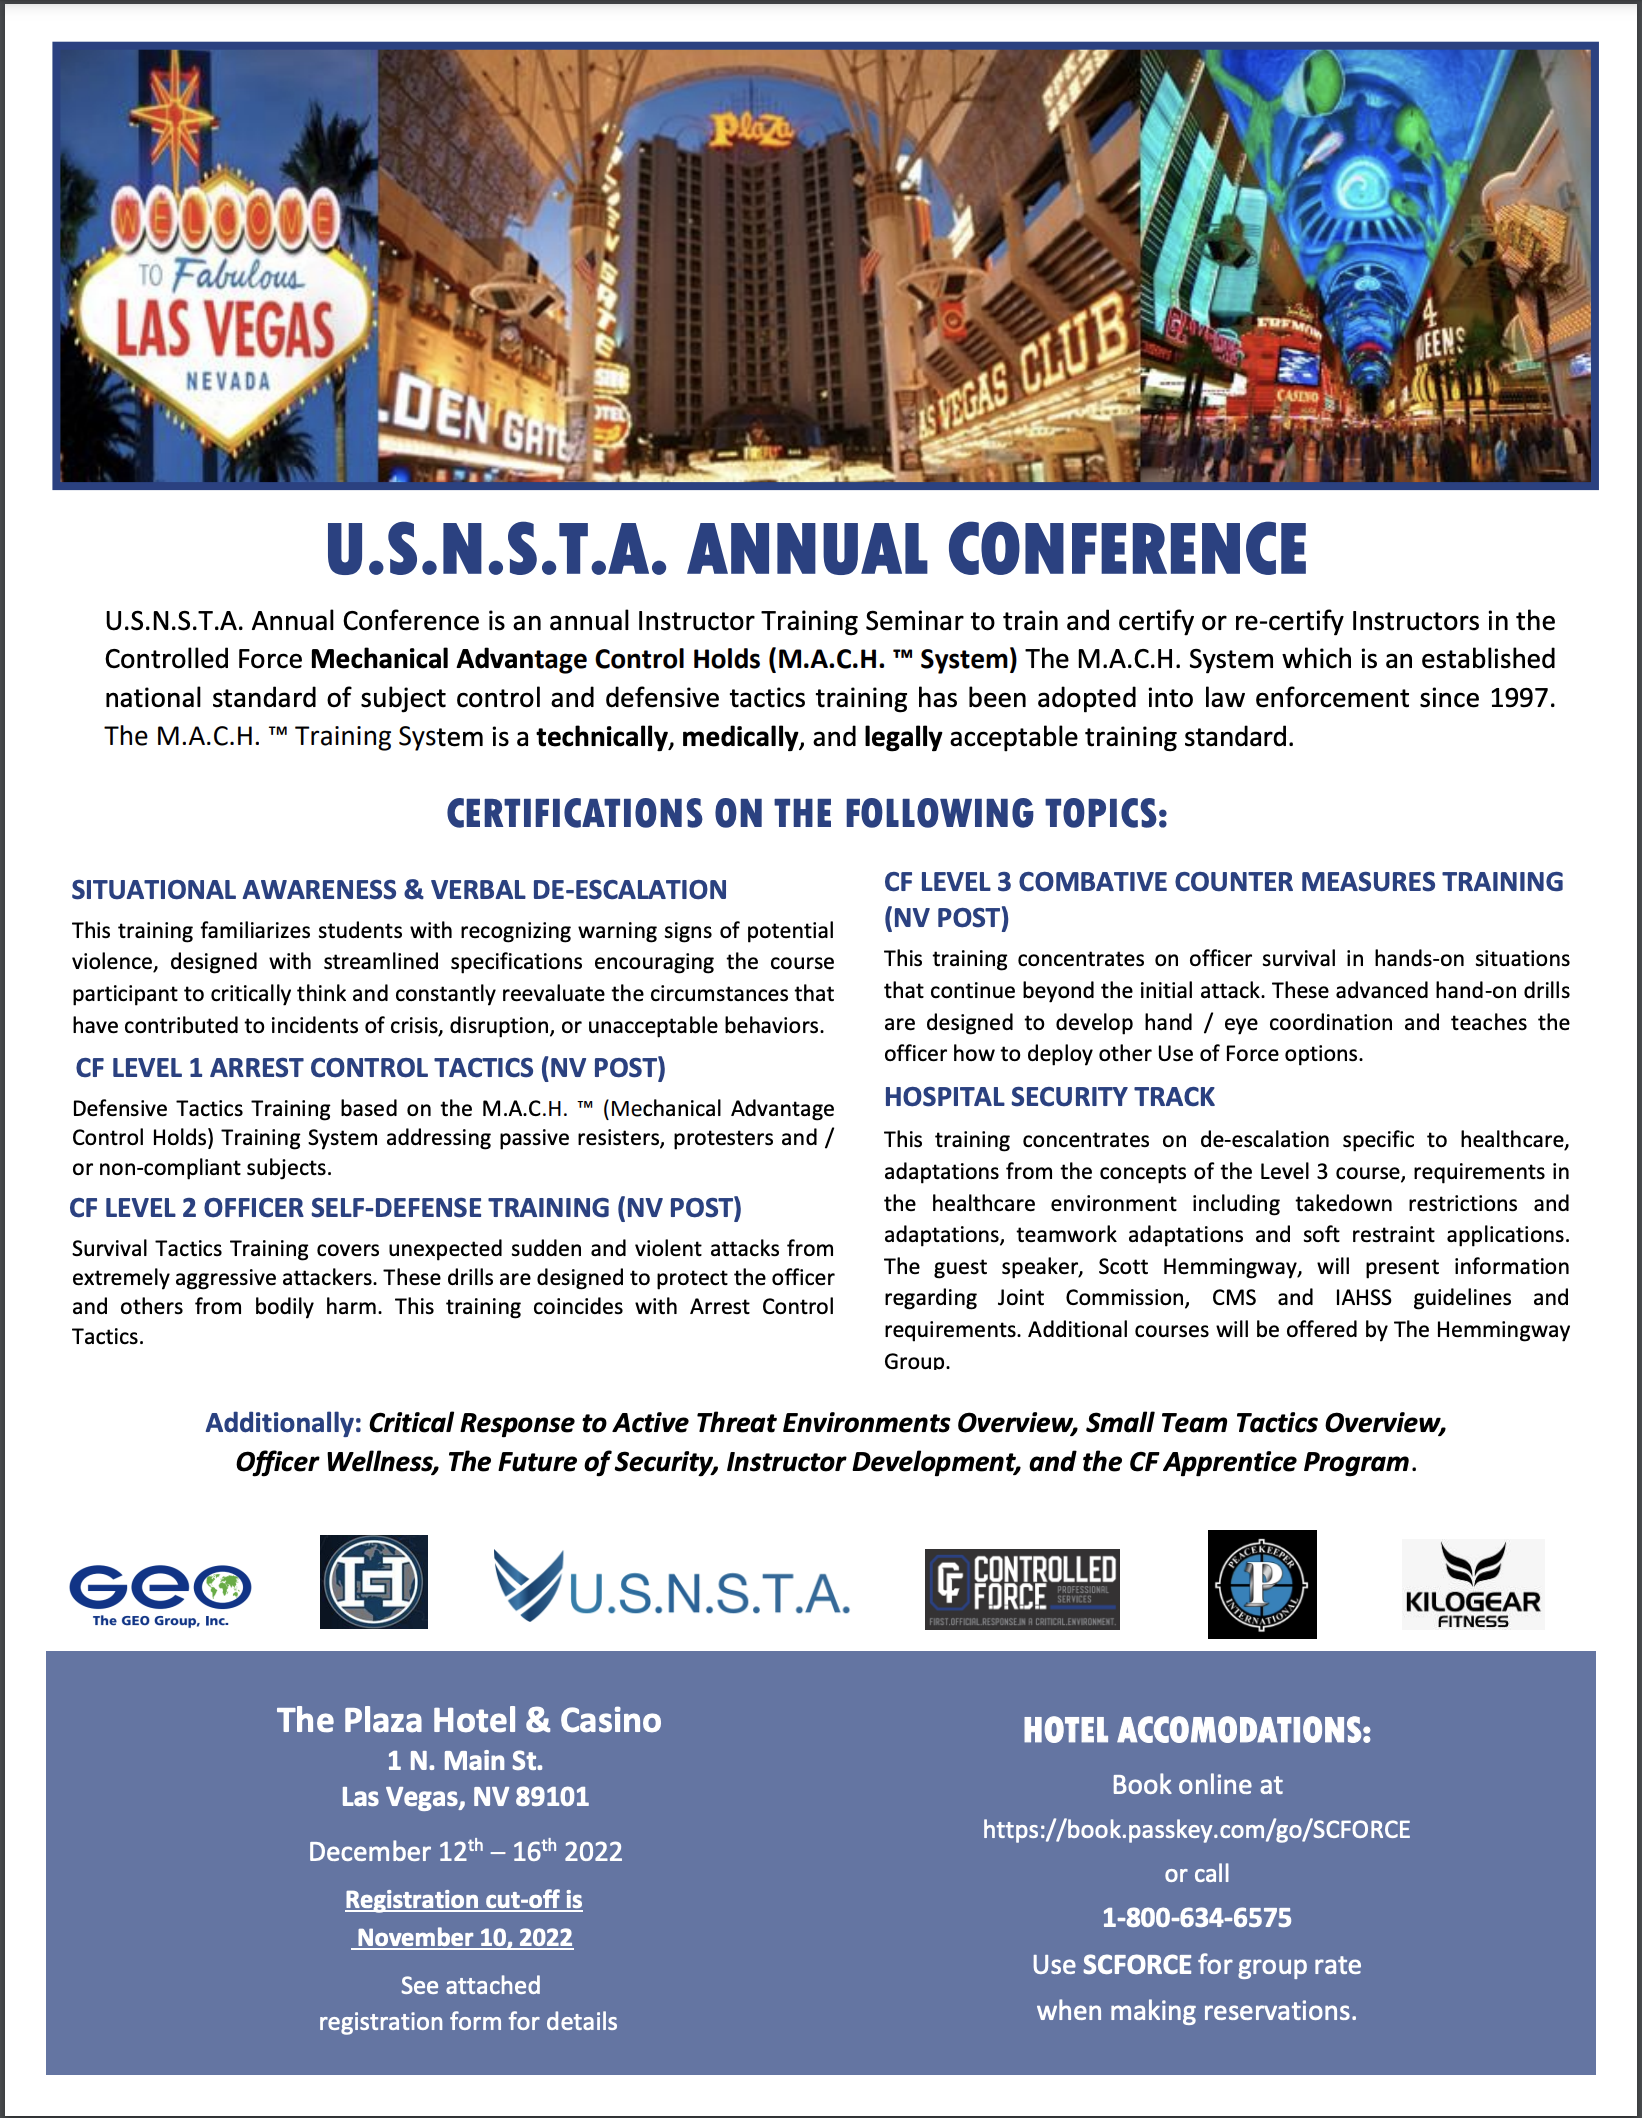 U.S.N.S.T.A. ANNUAL CONFERENCE